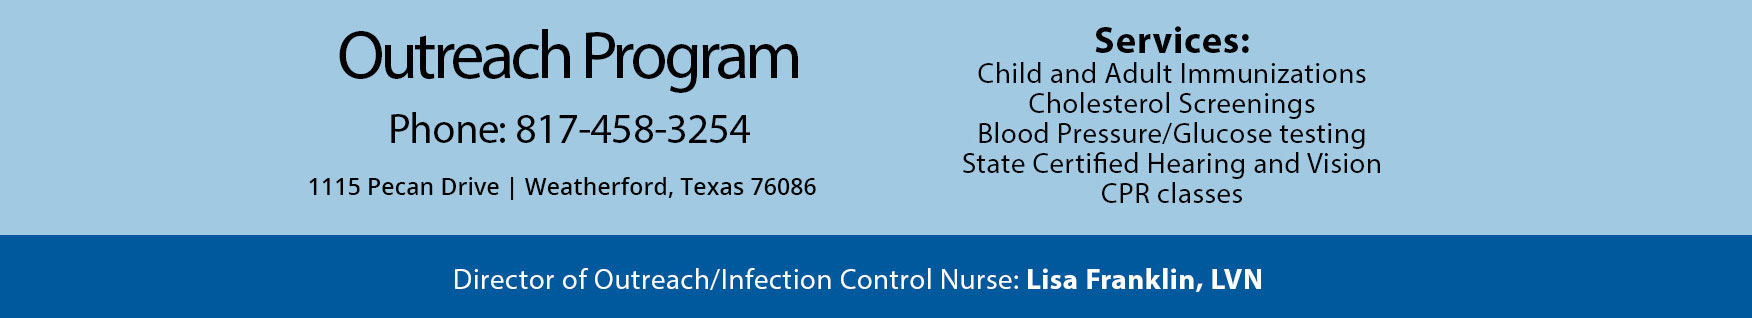 Outreach Program
Phone: 817-458-3254
1115 Pecan Drive
Weatherford, Texas 76086

Services:

Child and Adult immunizations
Cholesterol Screenings
Blood Pressure/ Glucose testing
State Certified Hearing and Vision 
CPR classes

Director of Outreach /Infection Control Nurse:
Lisa Franklin, LVN